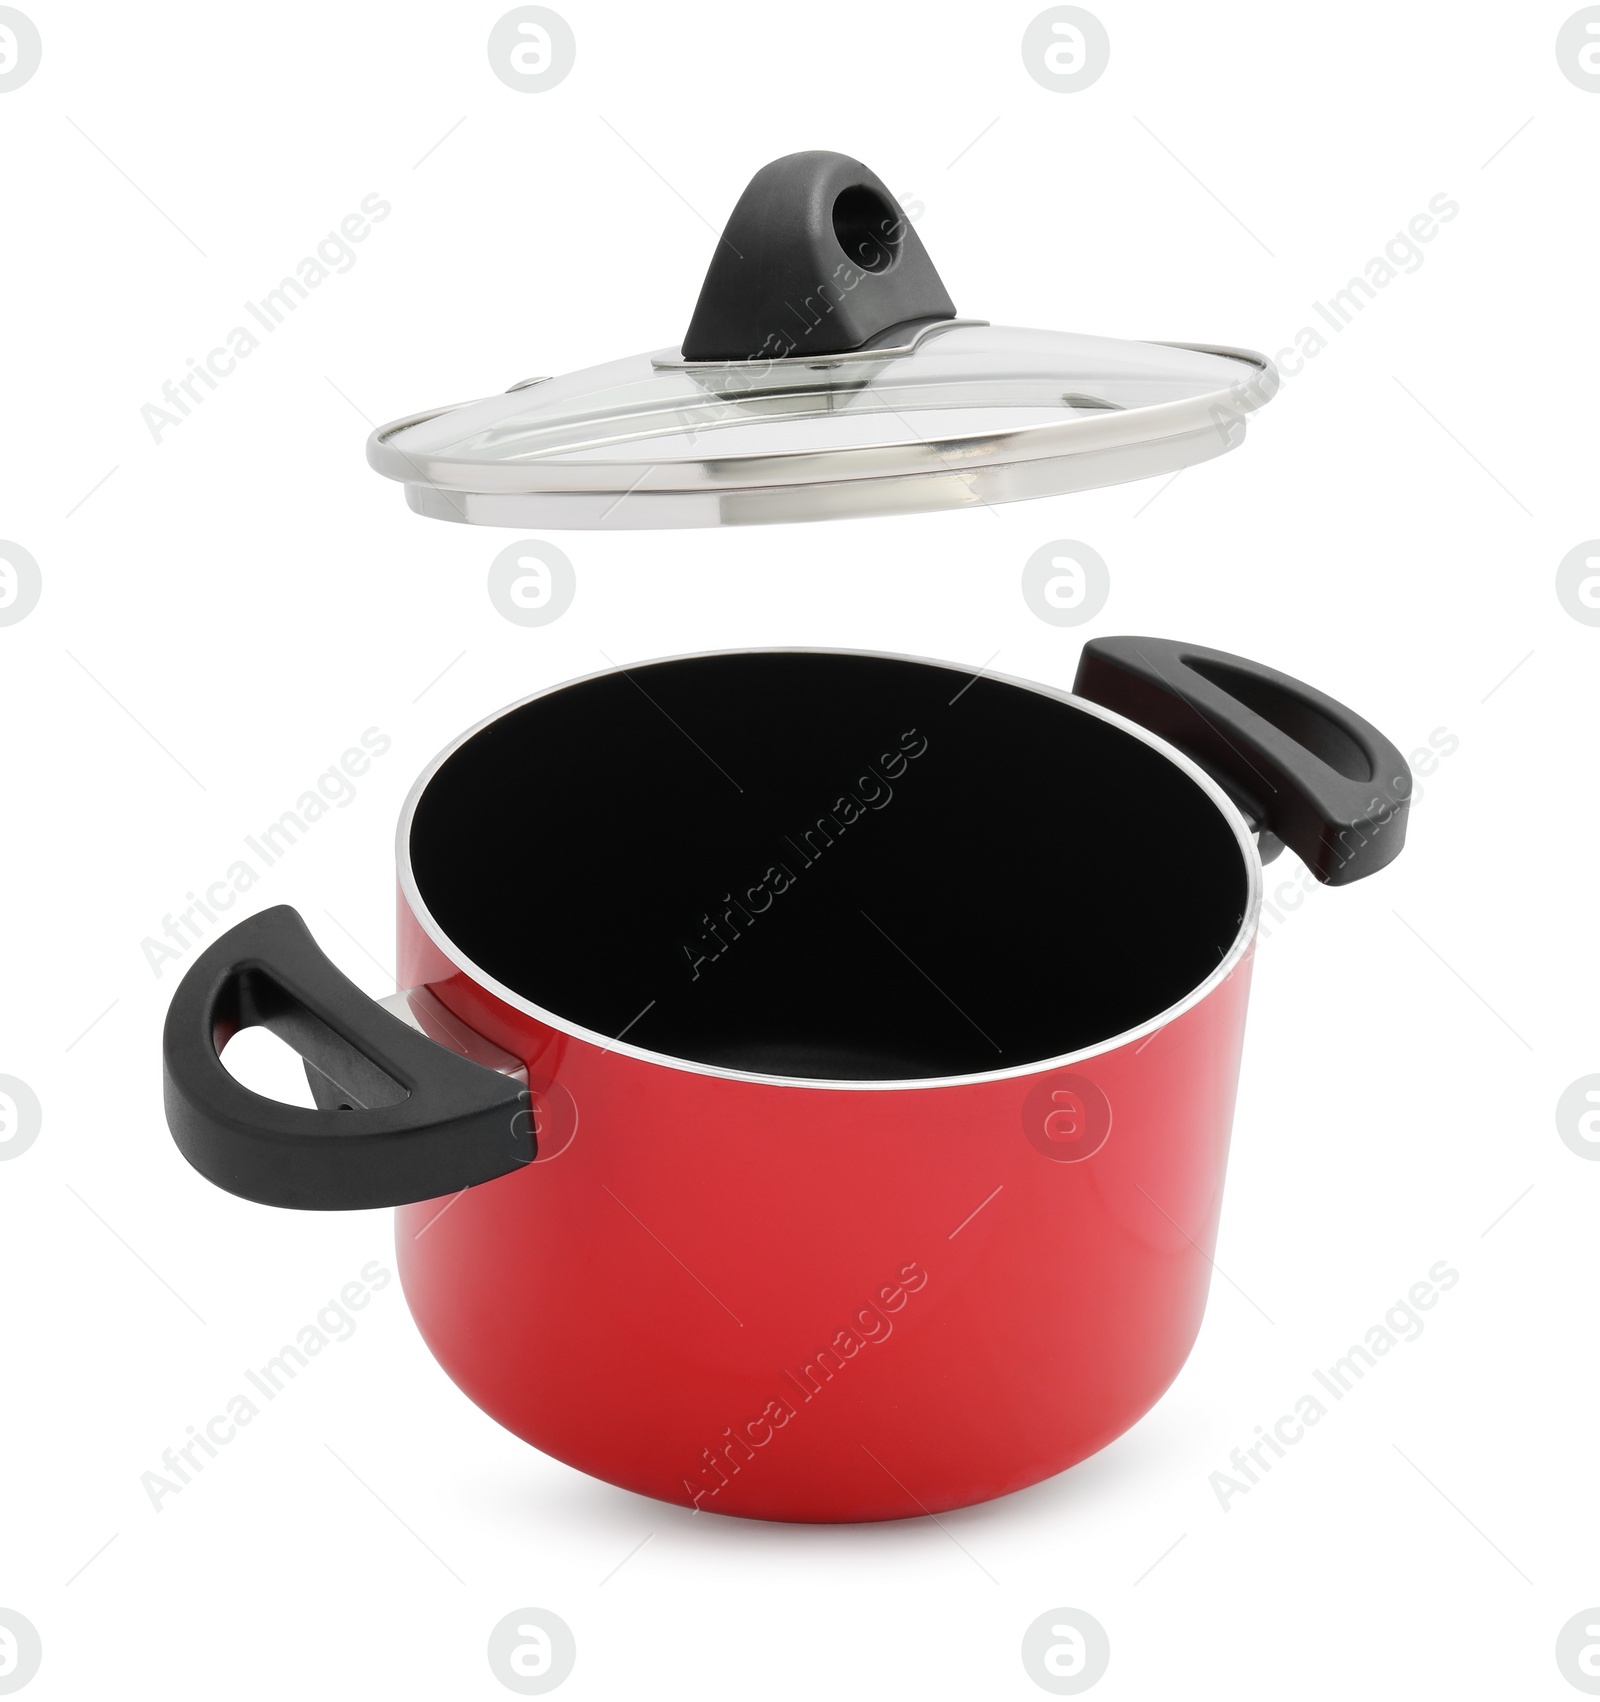 Photo of One red pot with glass lid isolated on white